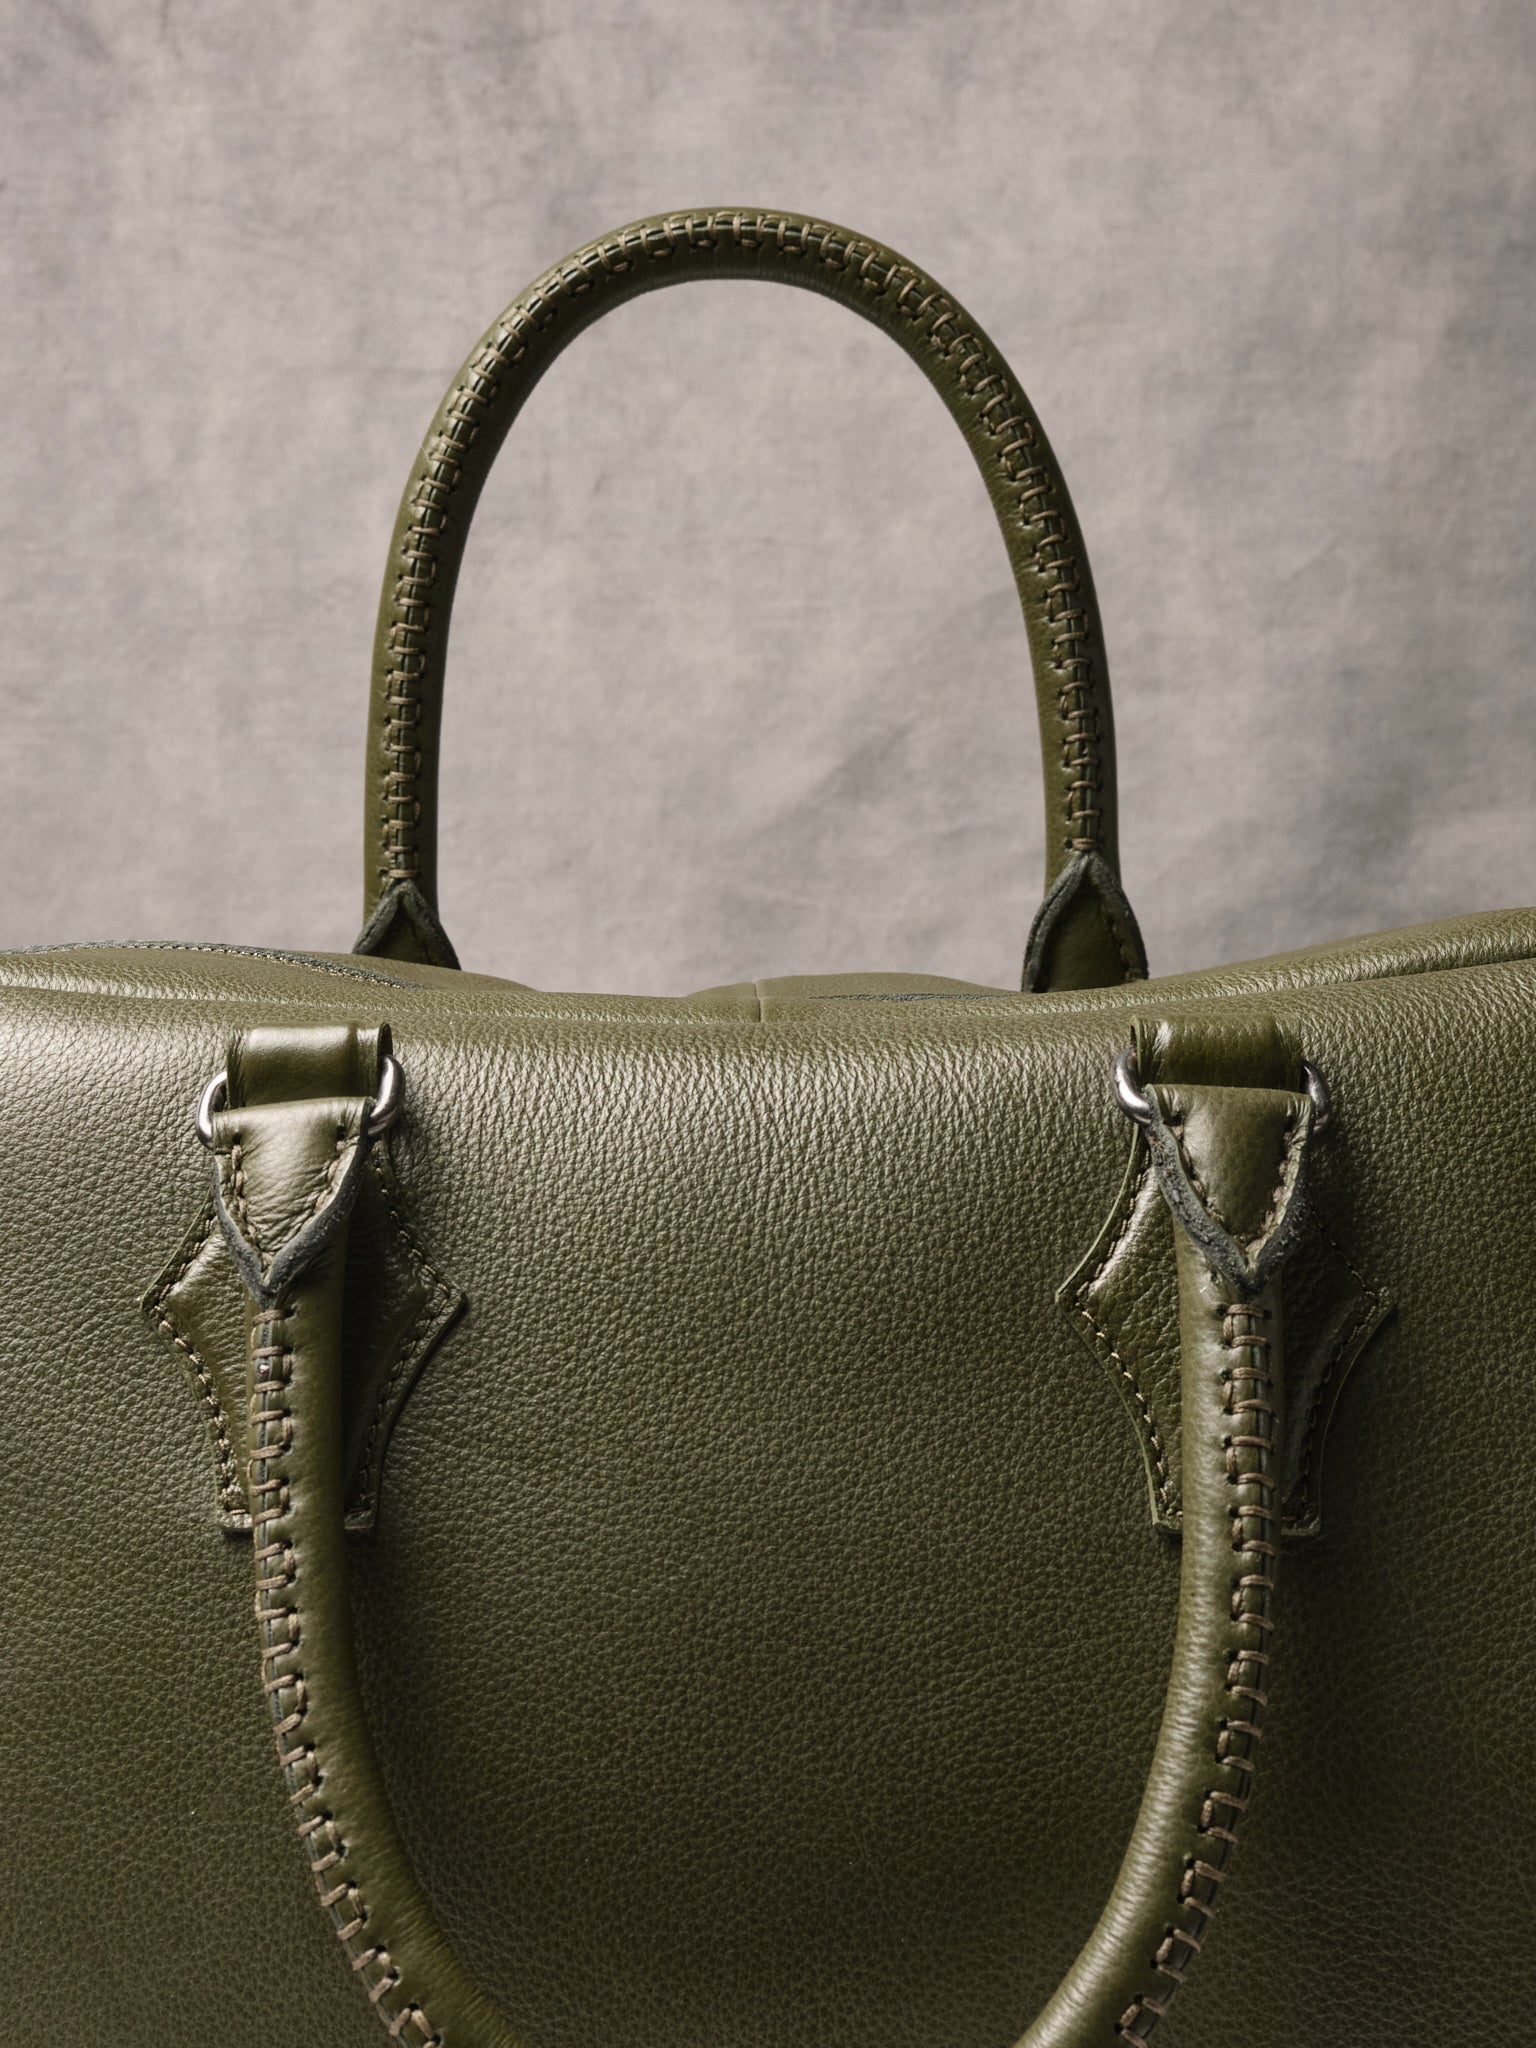 Cylindrical Hand-stitched Handles. Men's Weekend Travel Bag Green by Capra Leather